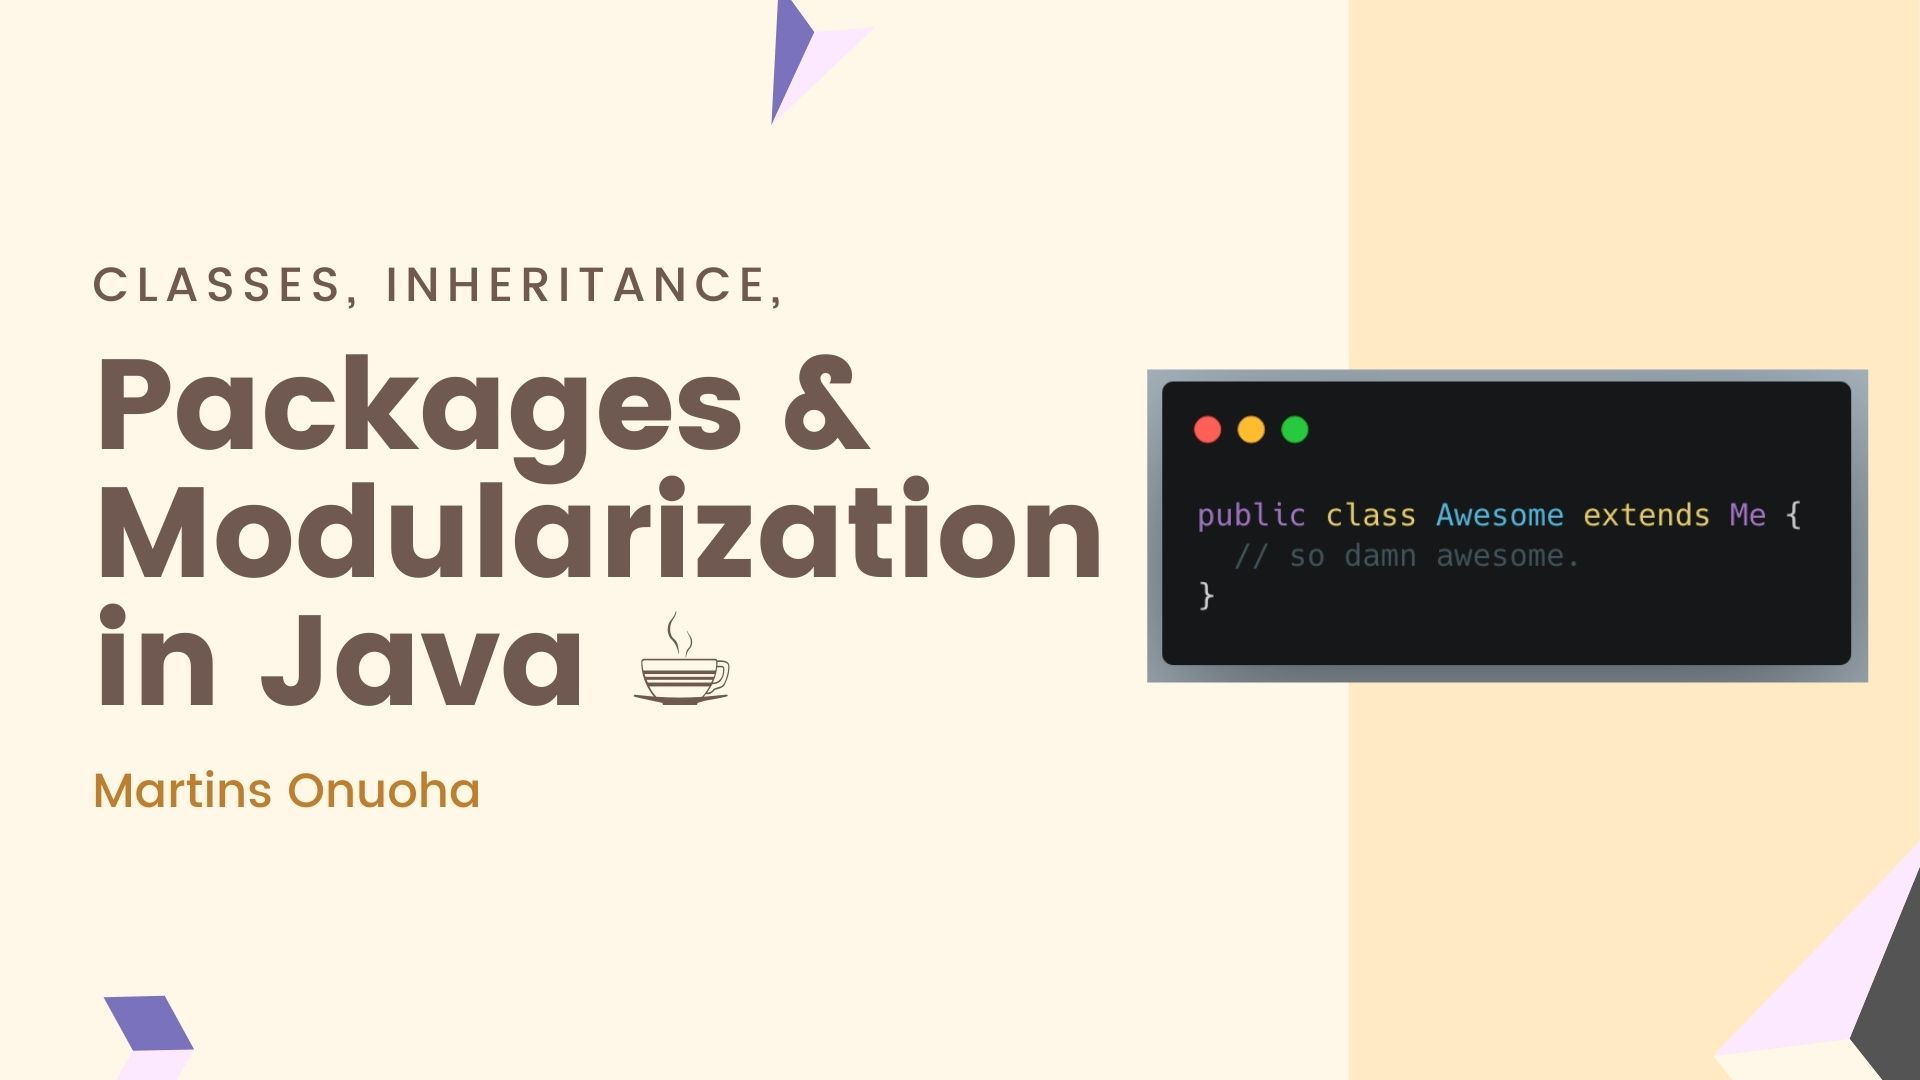 Classes, Inheritance, Packages & Modularization in Java ☕️